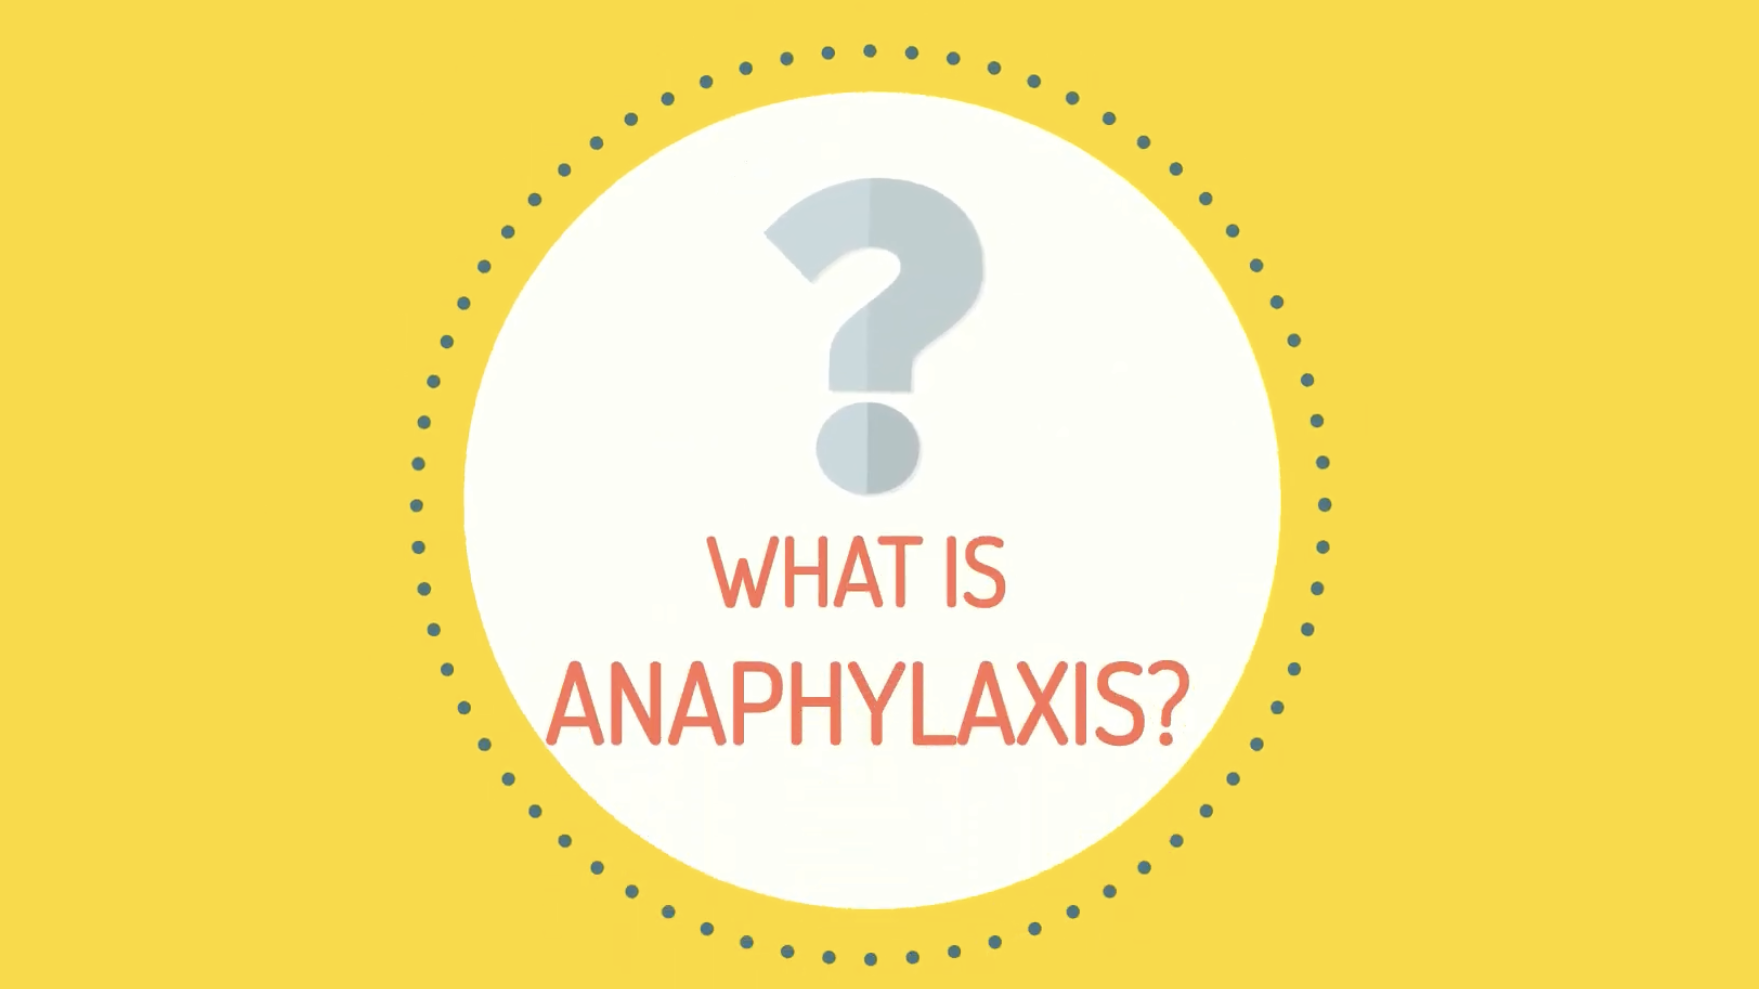 What is anaphylaxis?